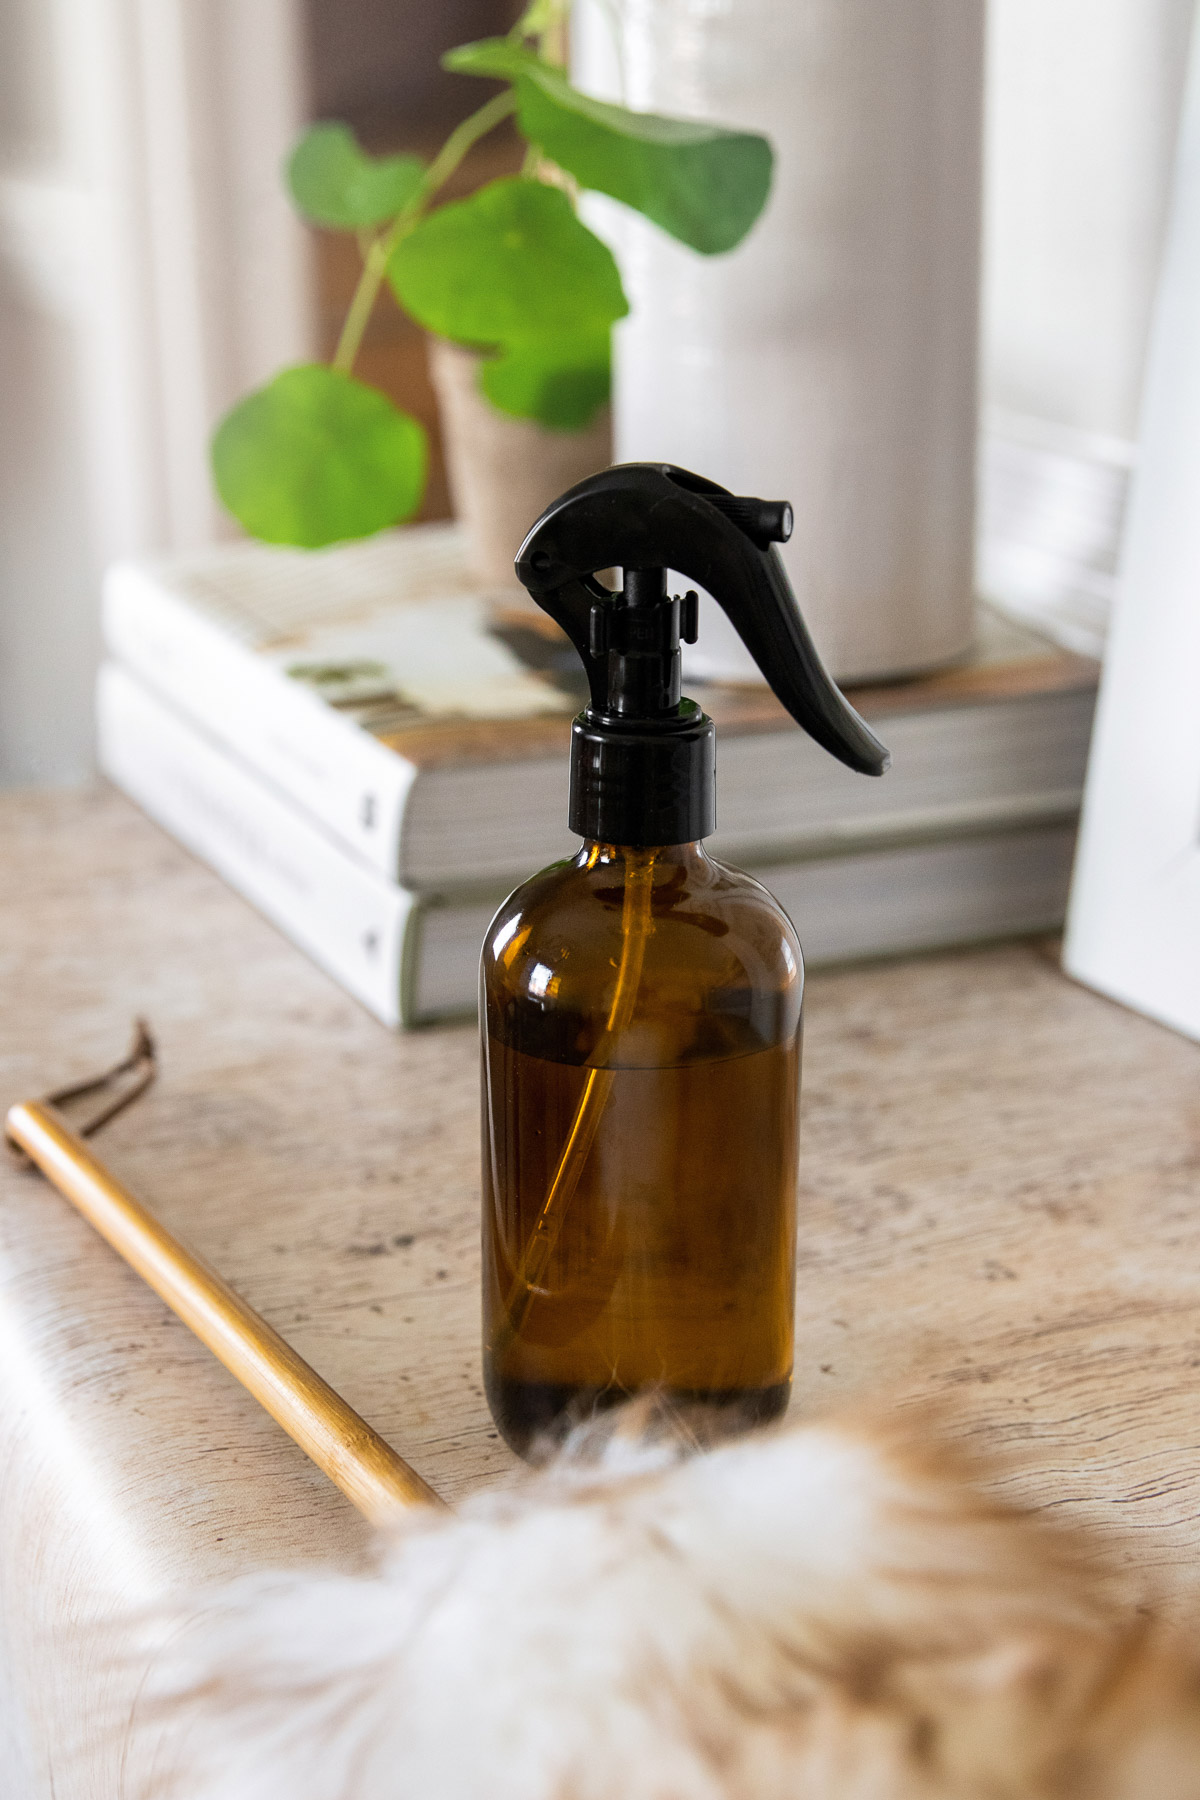 Made with just 5 ingredients, this homemade dusting spray tackles dust, nourishes wood, and leaves surfaces looking shiny and new.